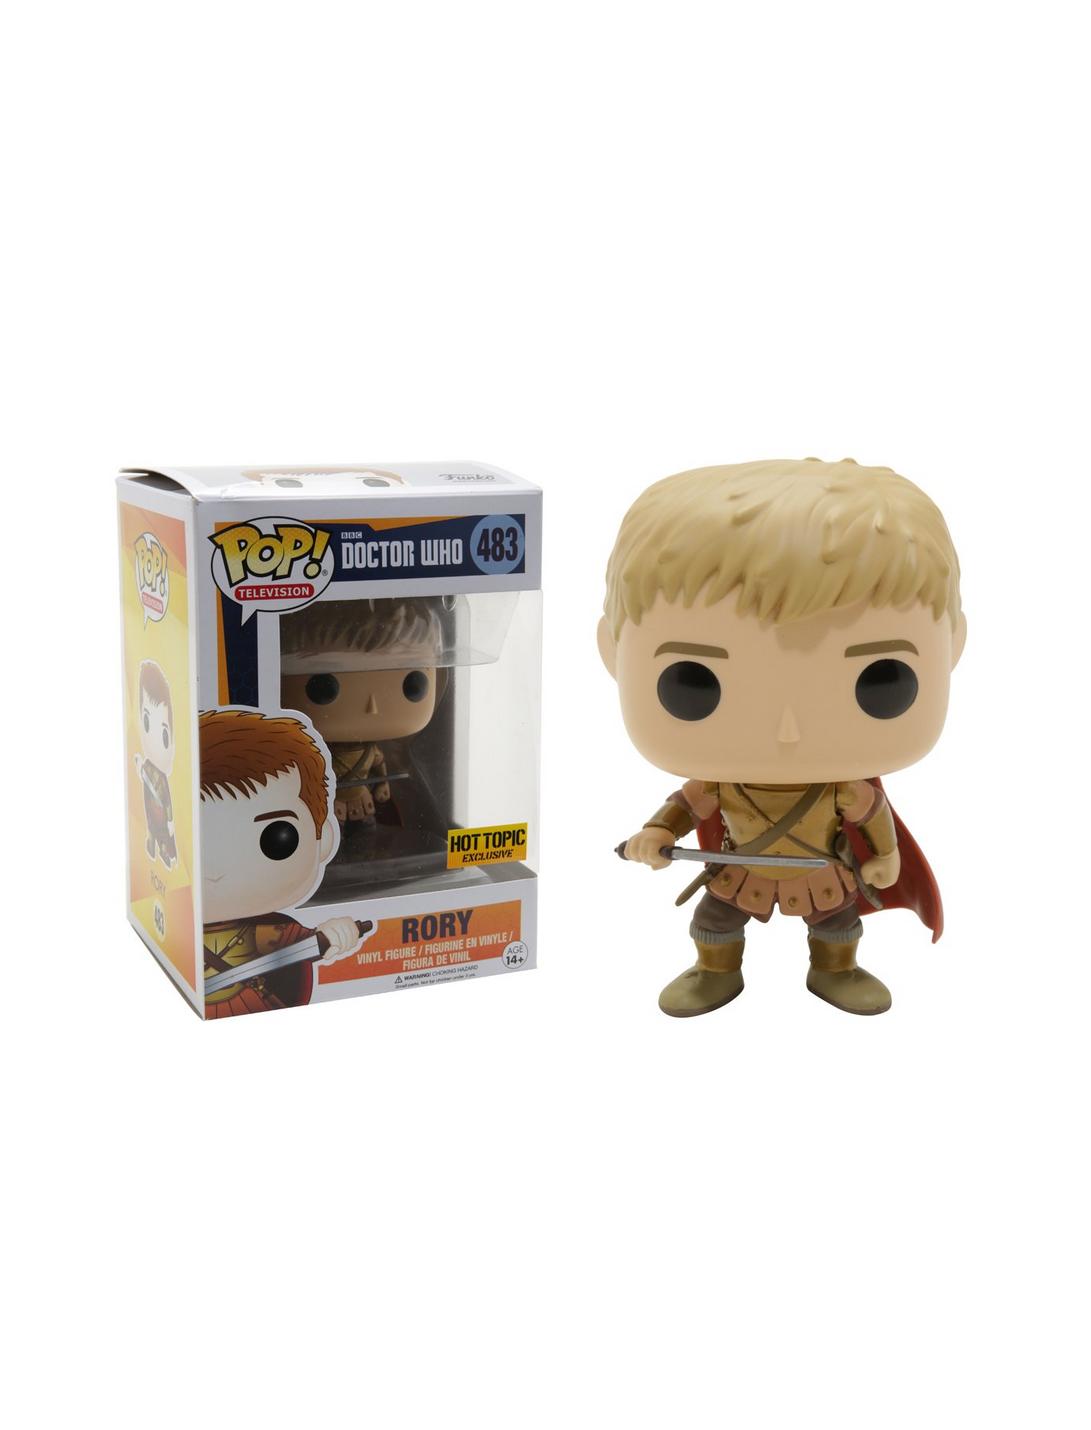 Funko Doctor Who Pop! Television Rory (Last Centurion) Vinyl Figure Hot Topic Exclusive, , hi-res